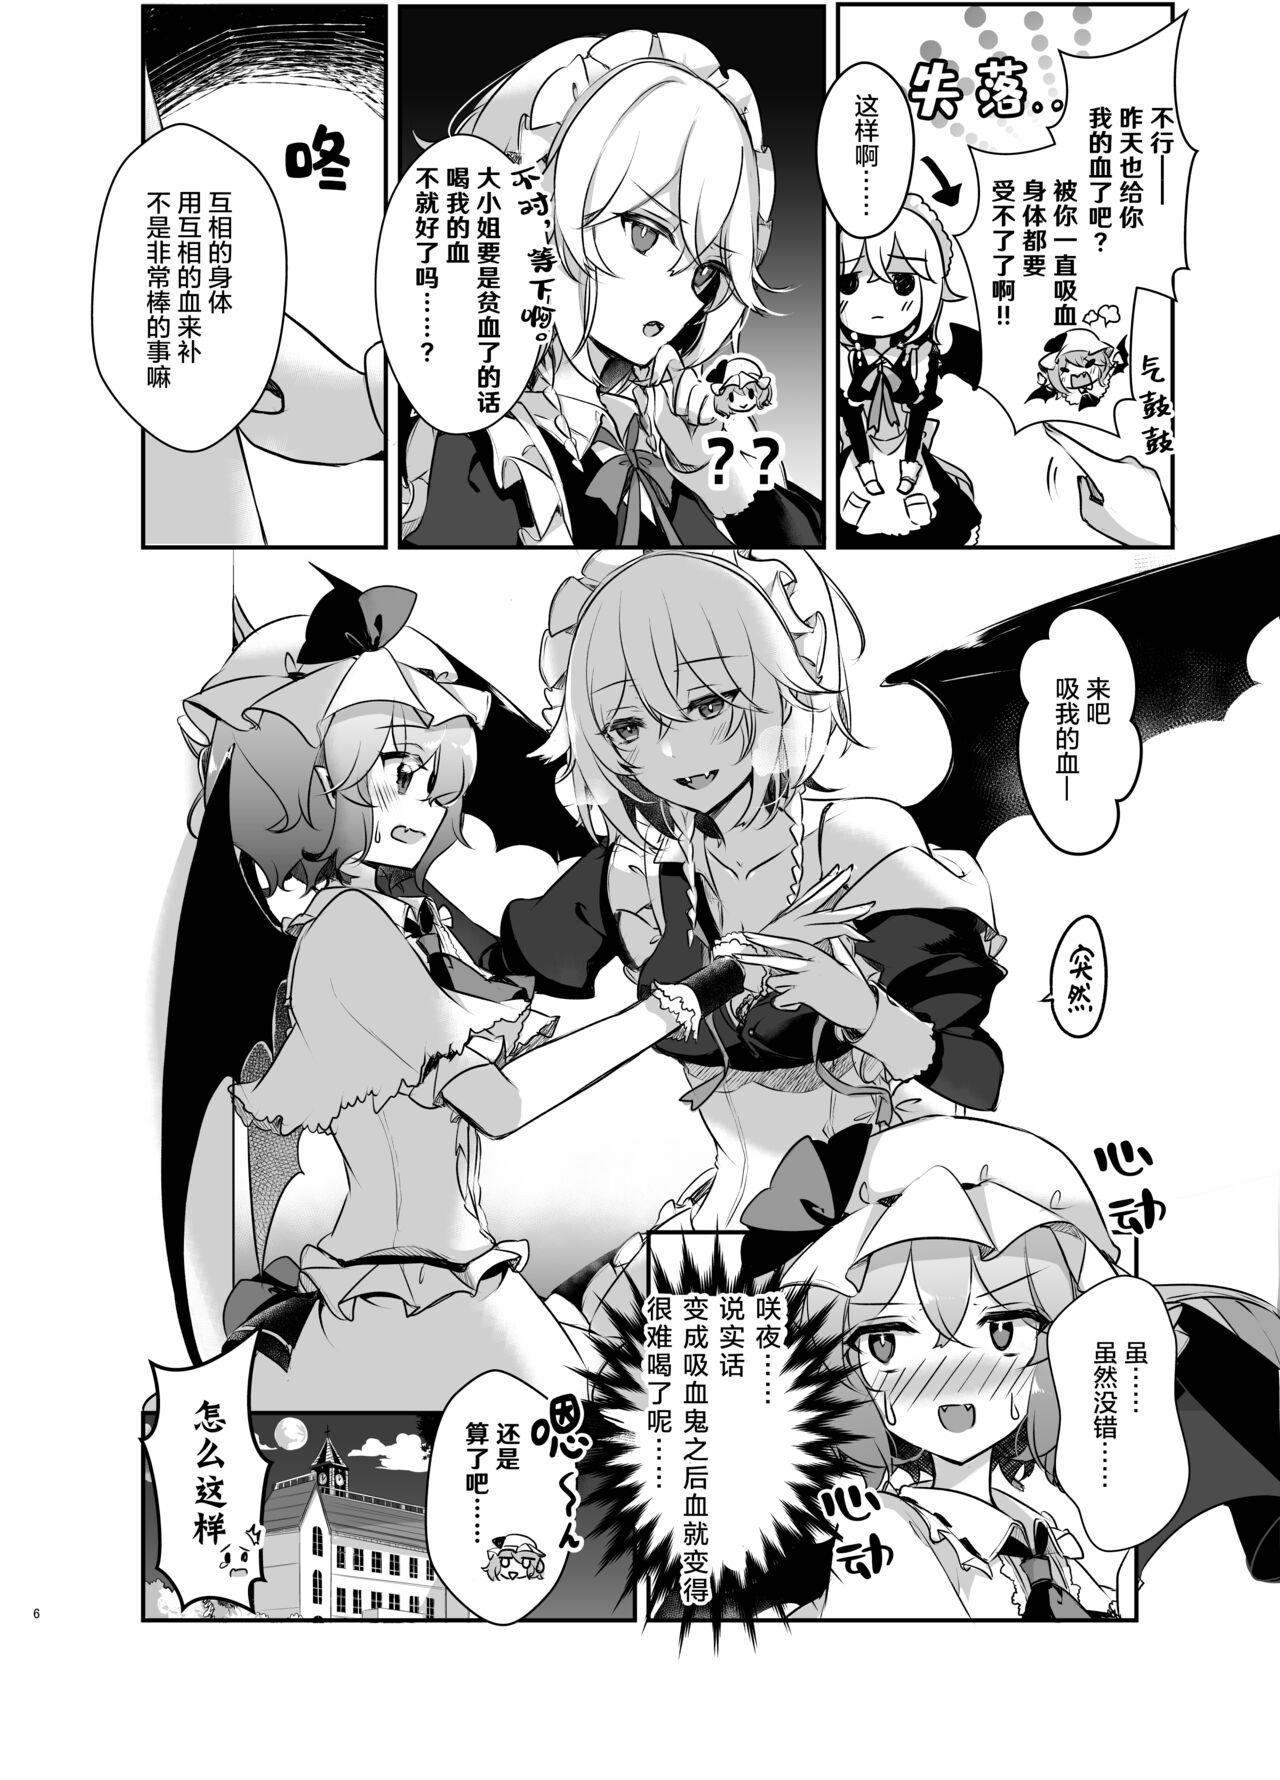 Webcamchat Todome wo Sashite | 致命打击 - Touhou project Thief - Page 7